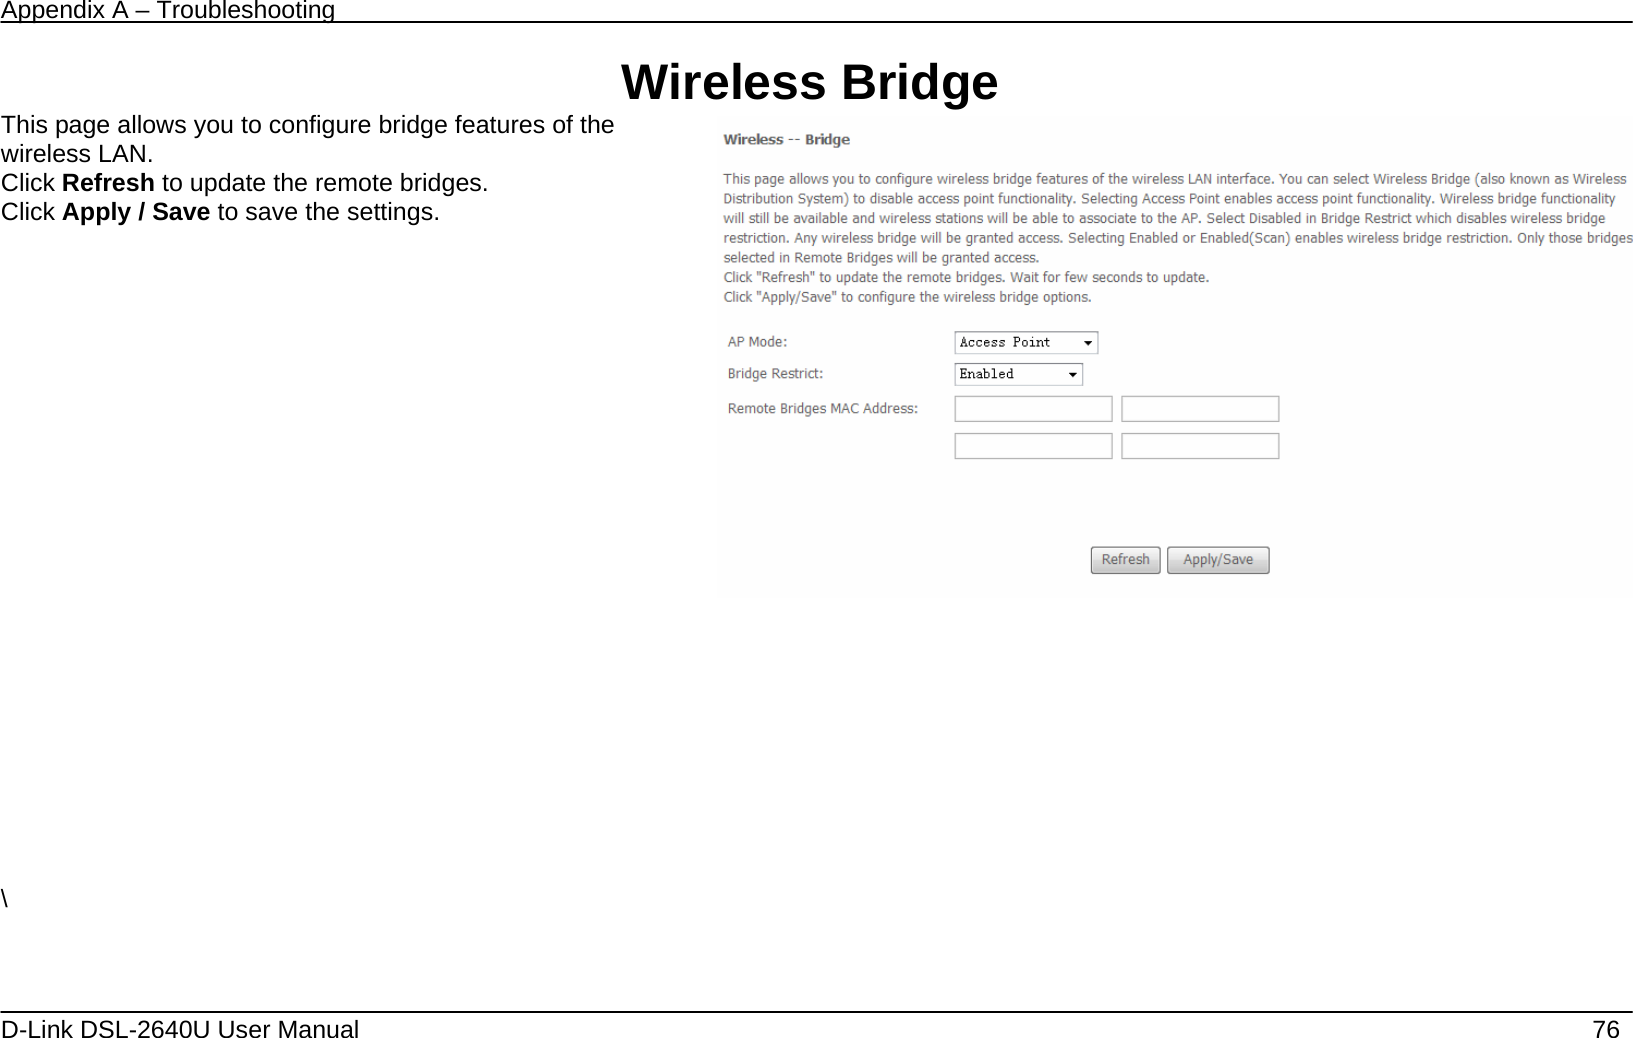 Appendix A – Troubleshooting   D-Link DSL-2640U User Manual    76 Wireless Bridge This page allows you to configure bridge features of the wireless LAN. Click Refresh to update the remote bridges. Click Apply / Save to save the settings.             \   